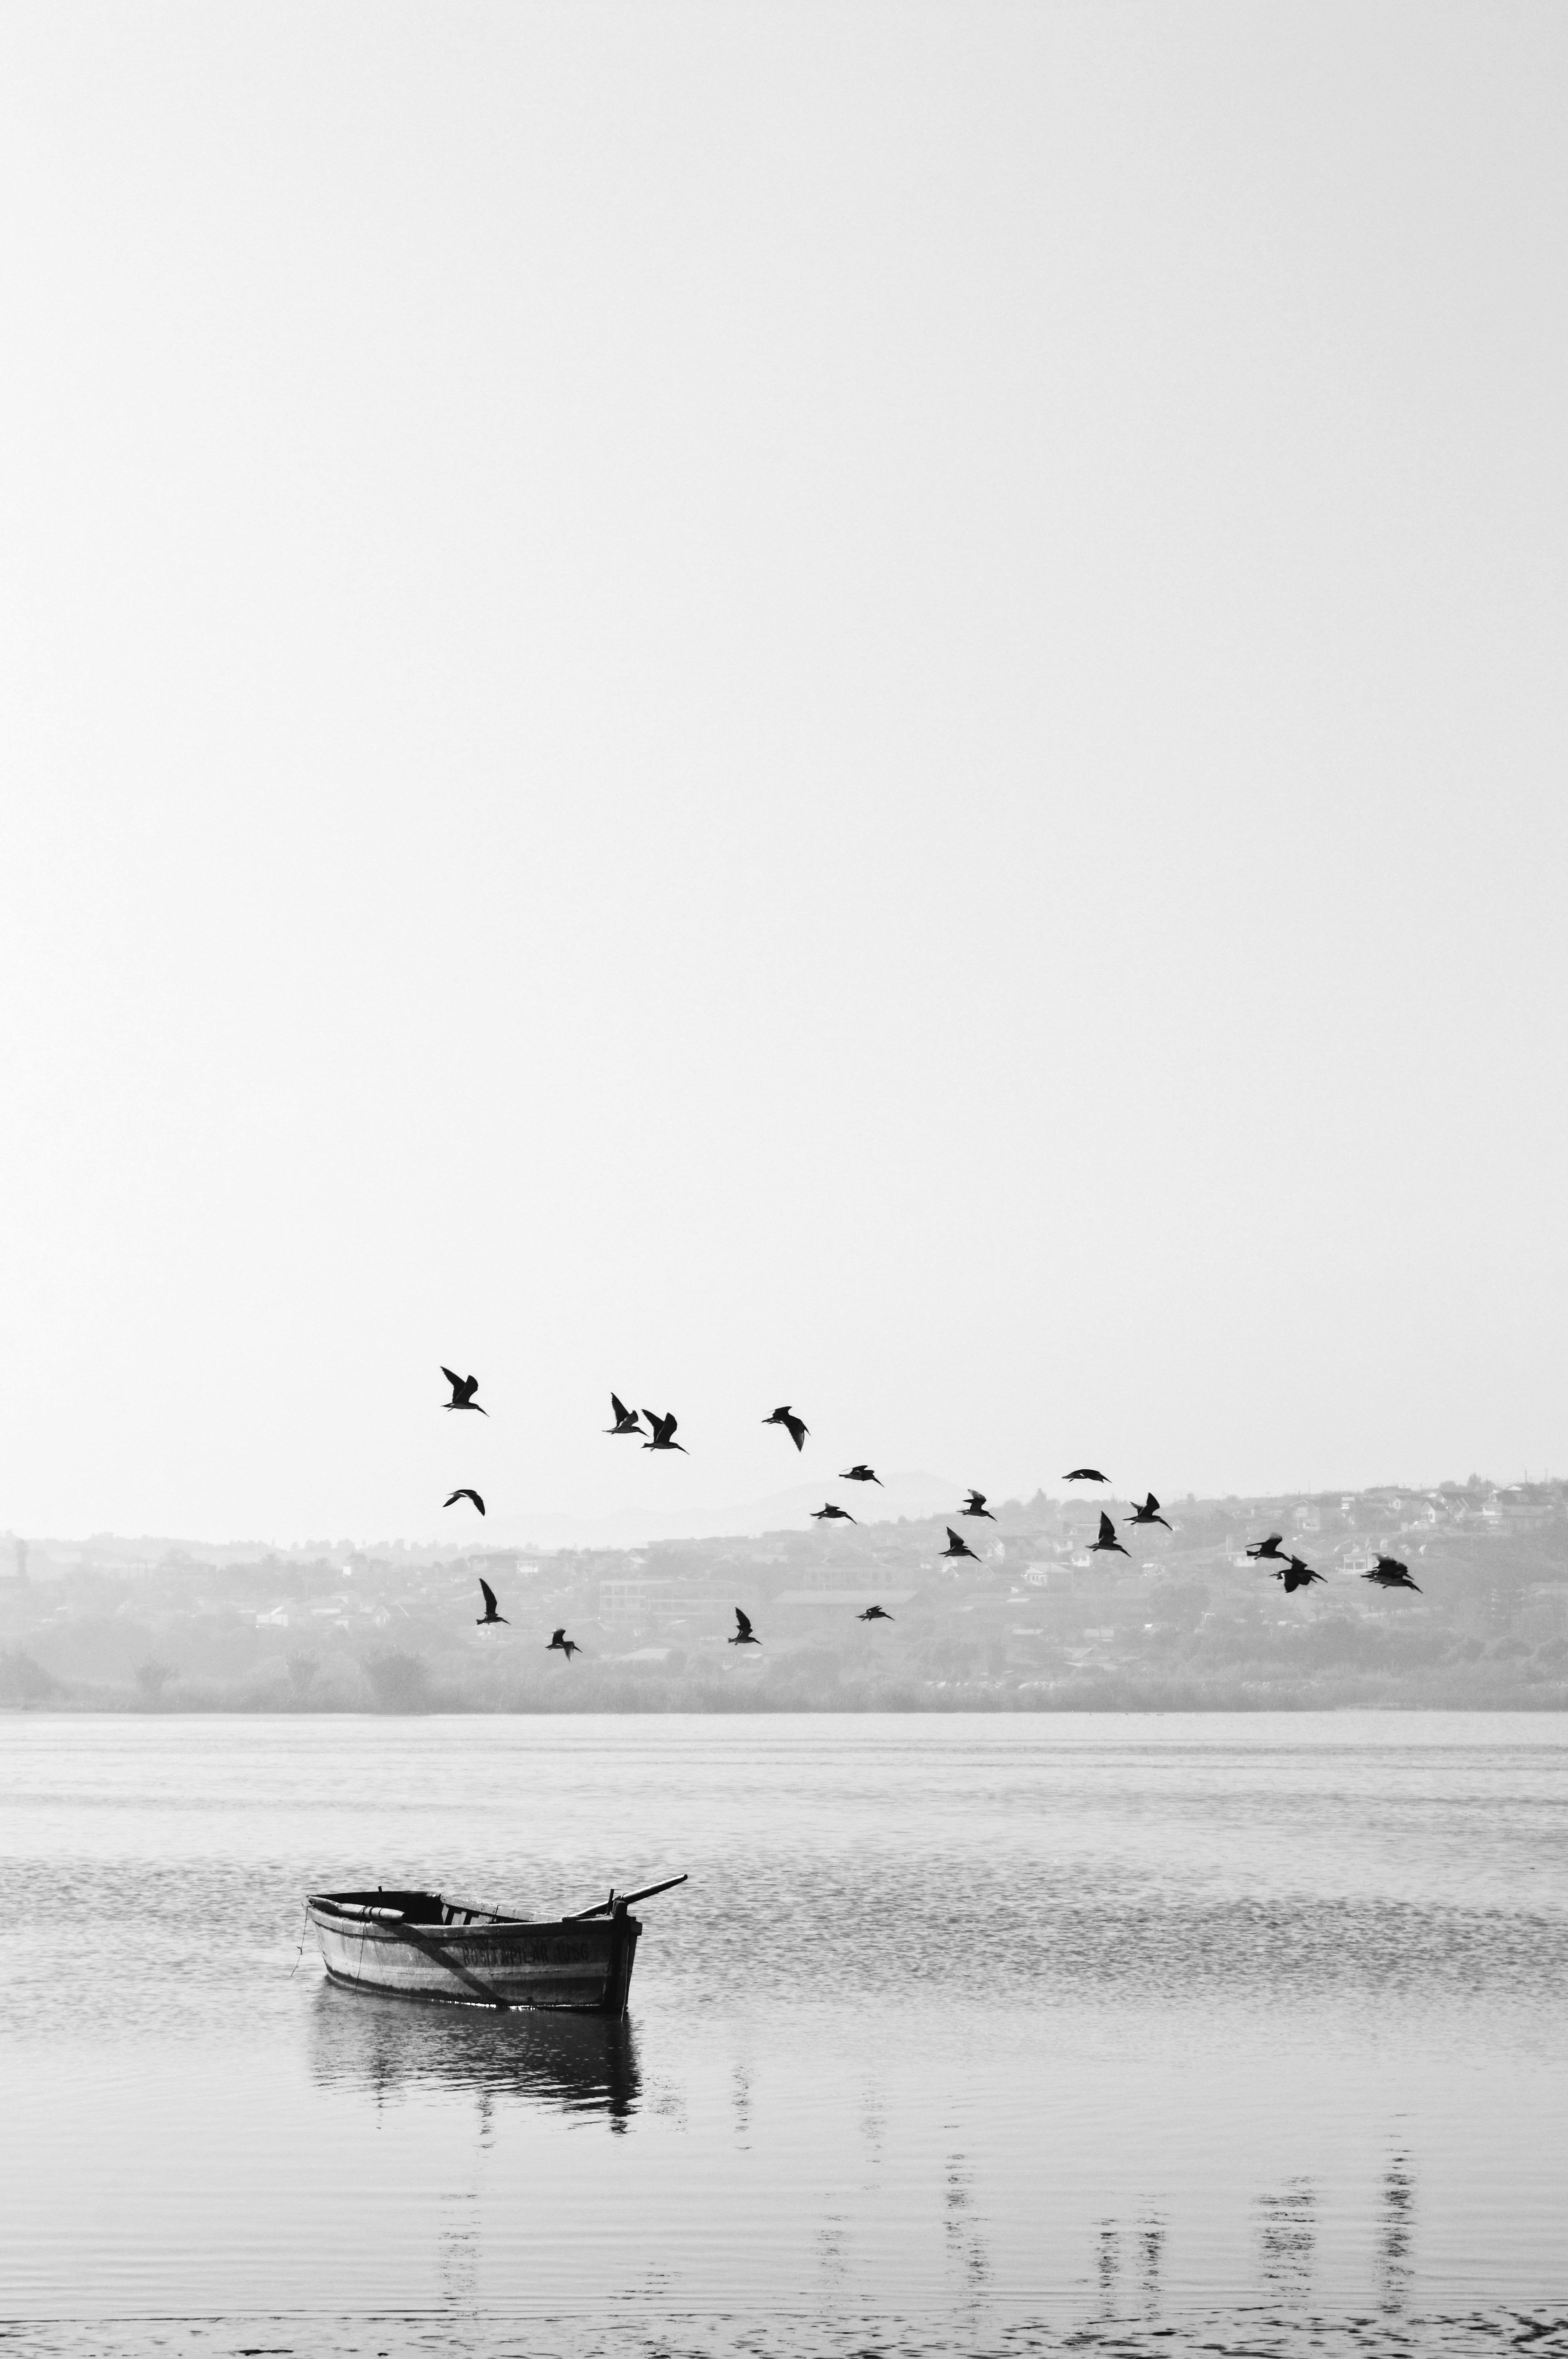 64888 download wallpaper birds, nature, horizon, bw, chb, boat screensavers and pictures for free